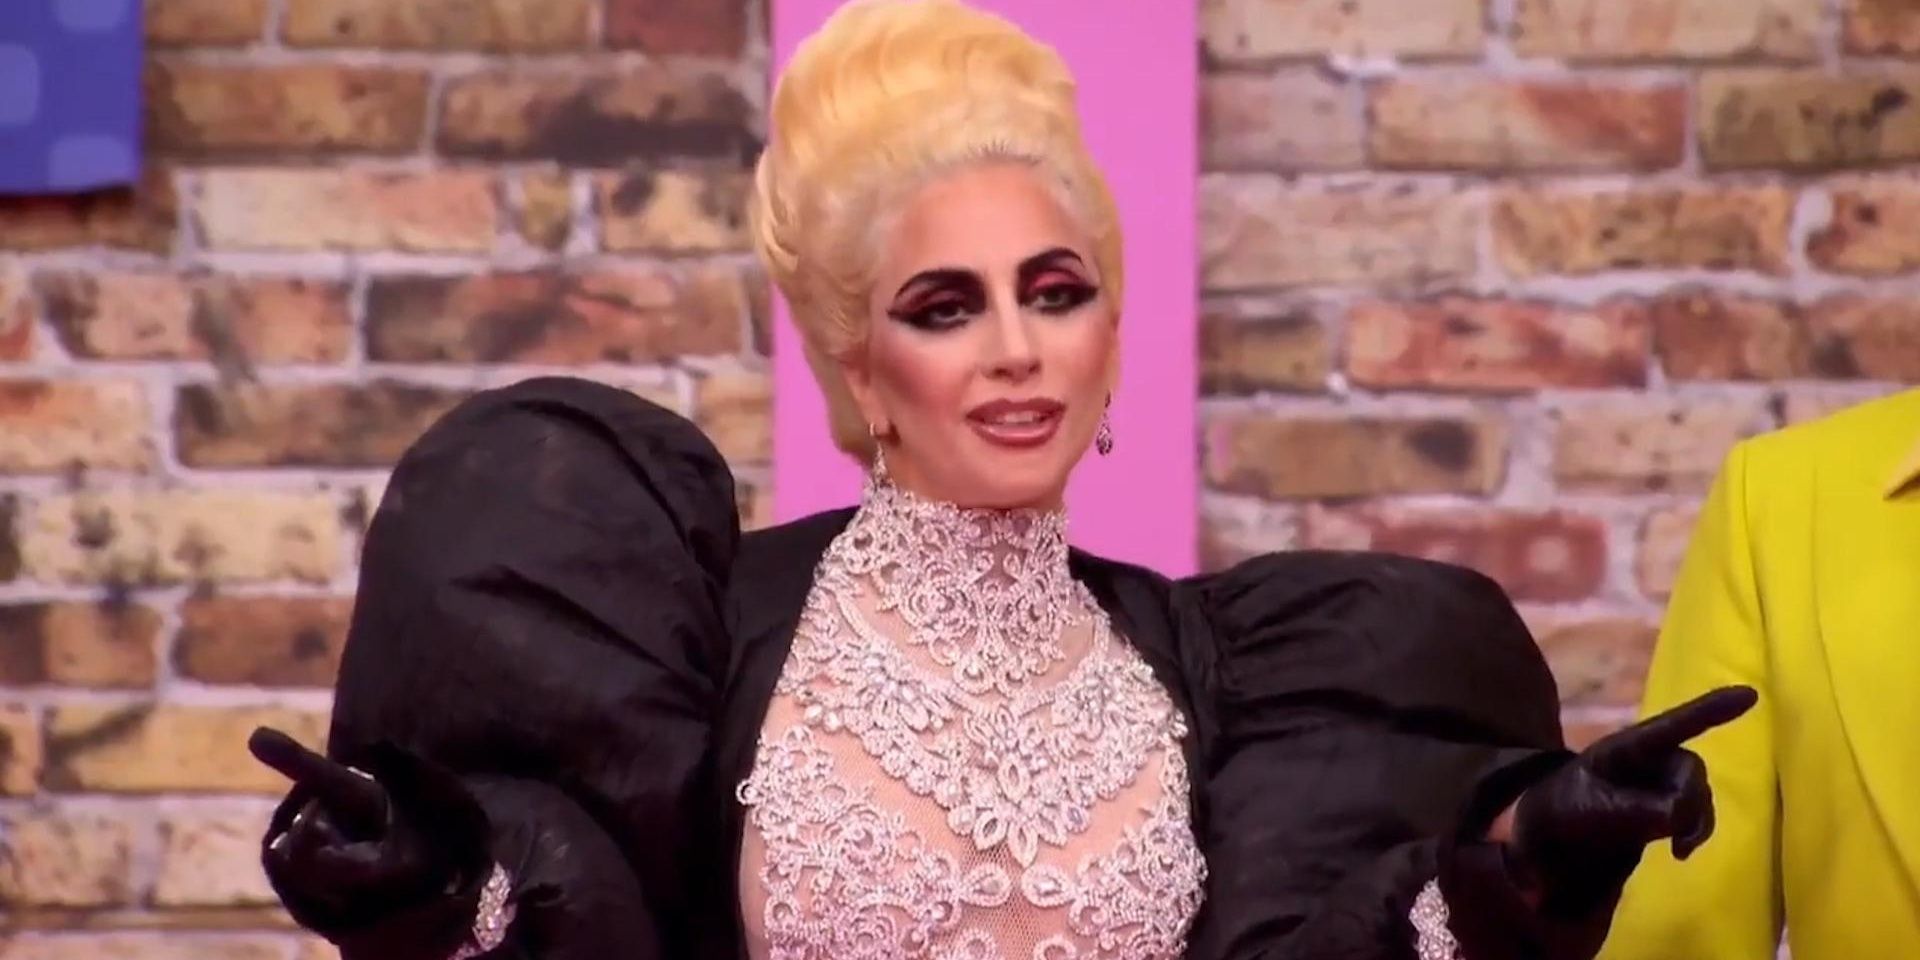 Cher will consider RuPaul's Drag Race guest judge appearance